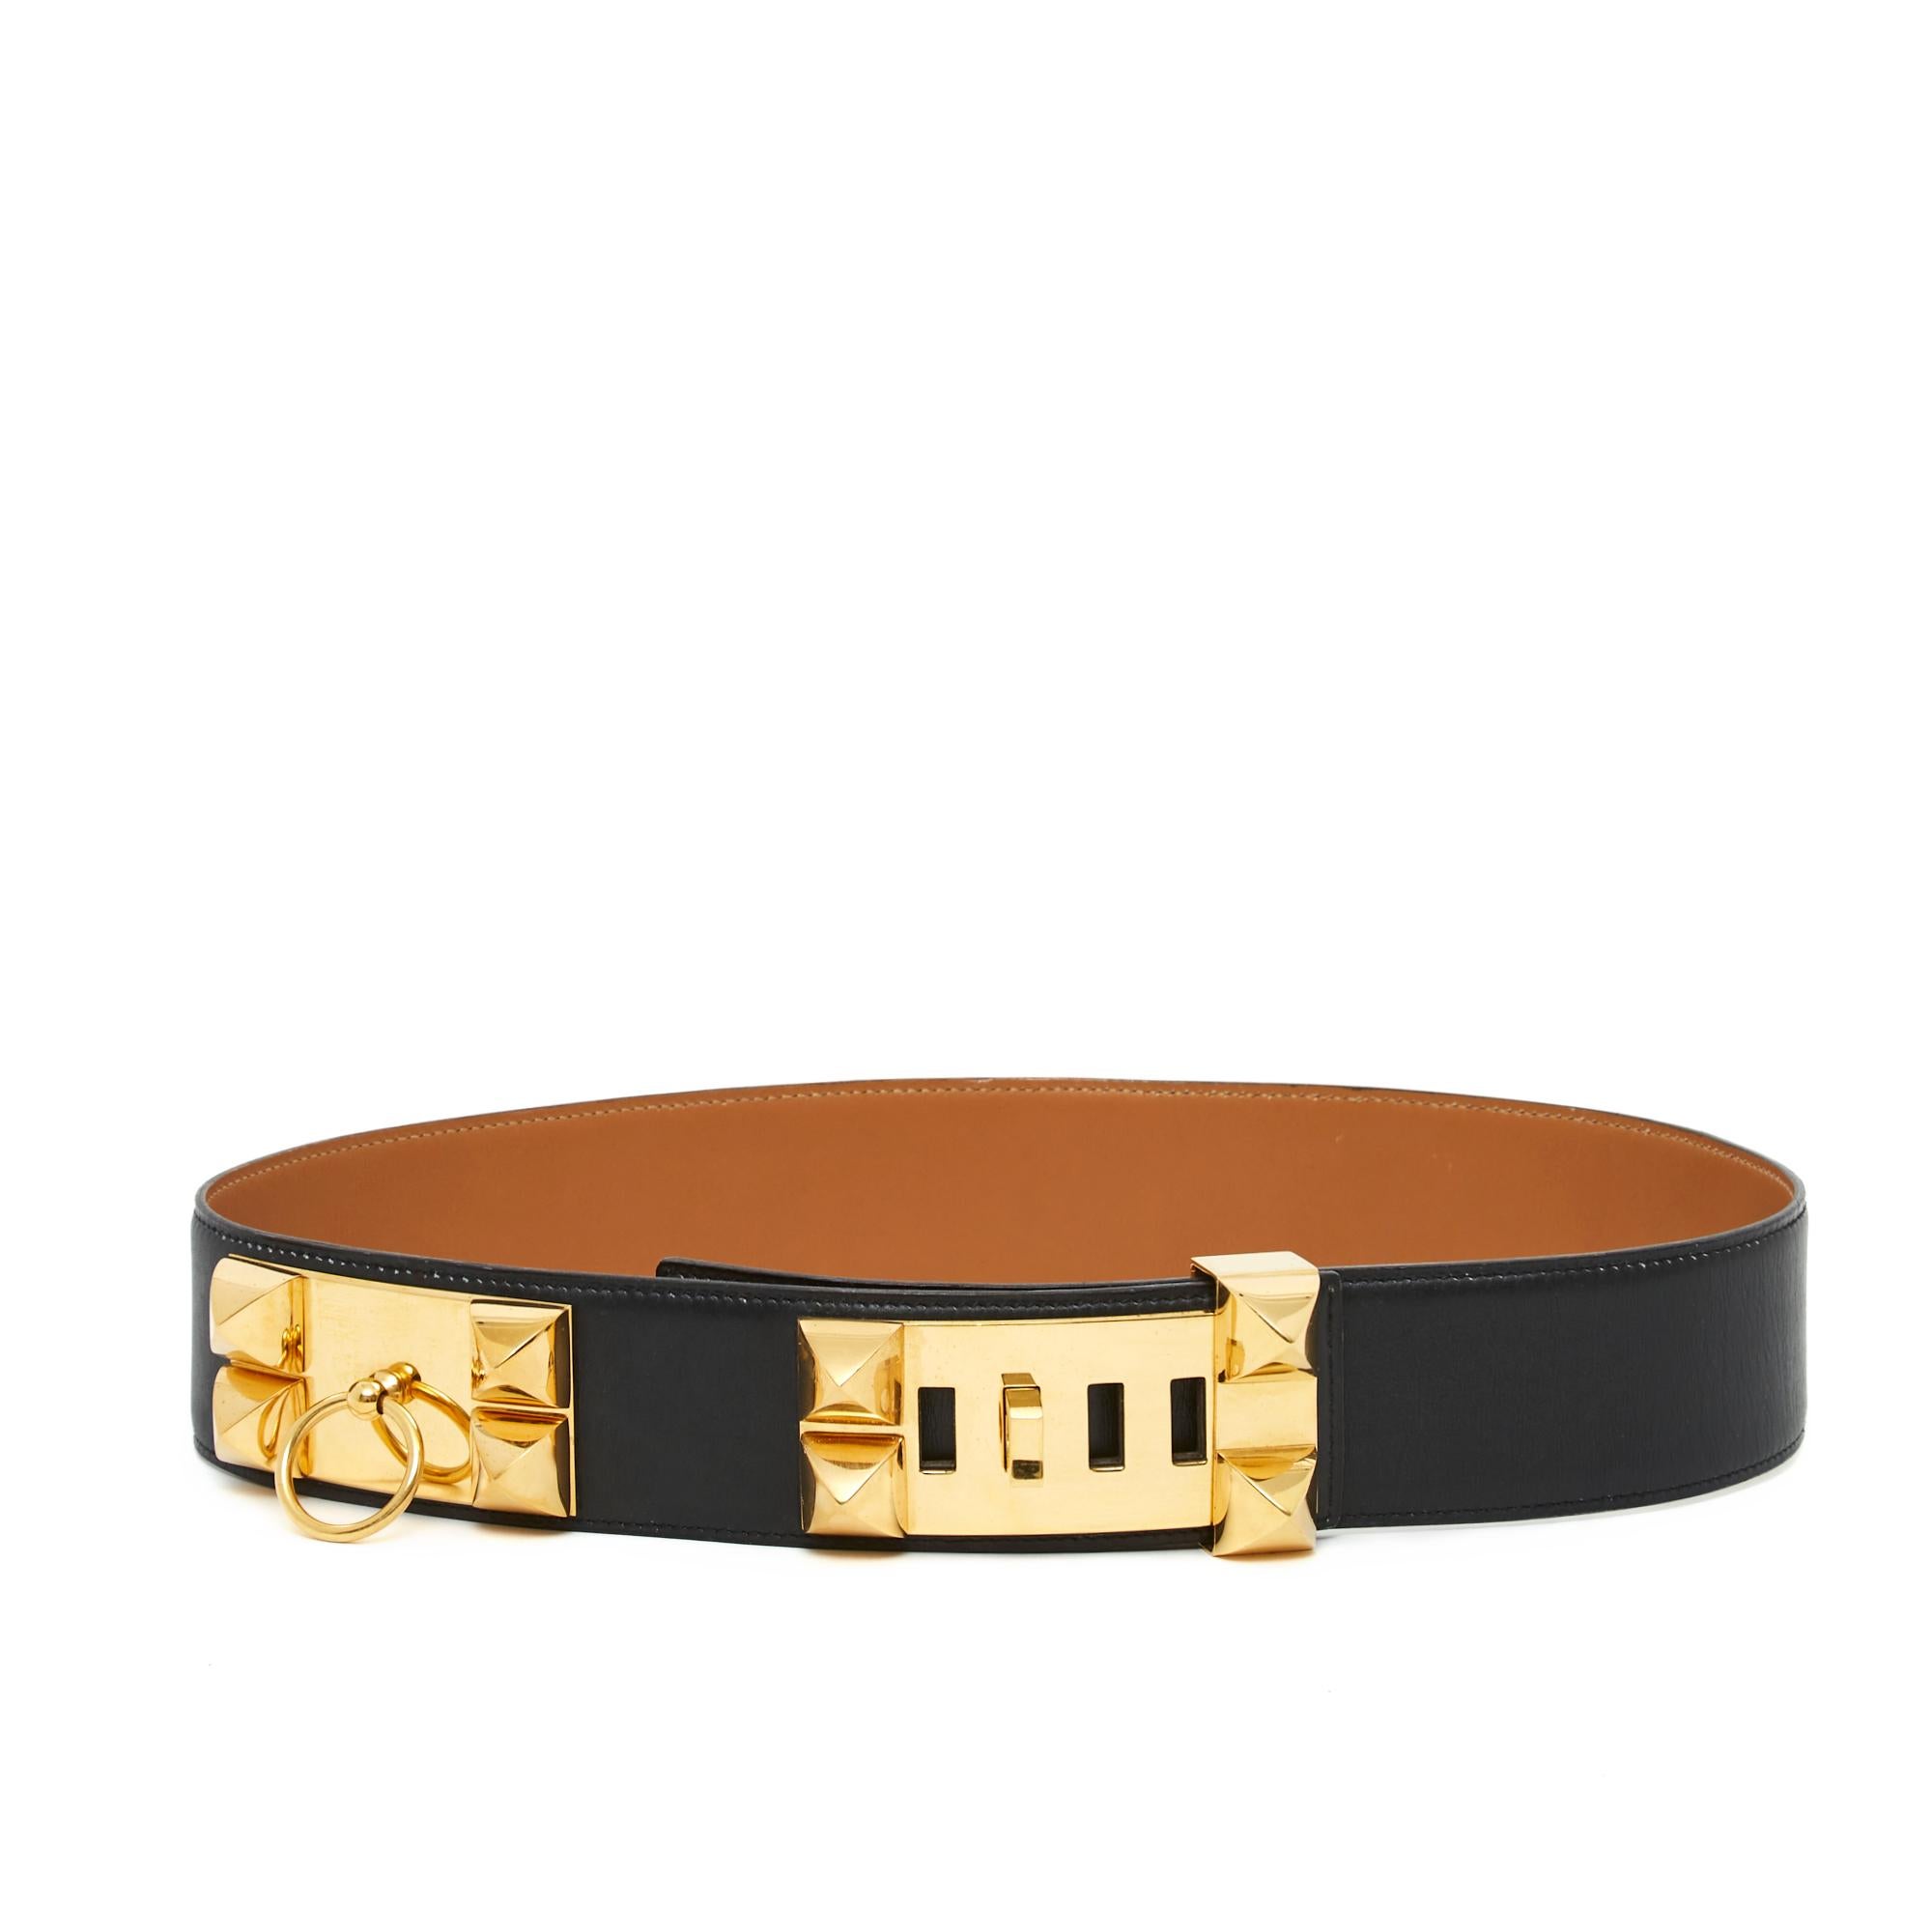 Hermès belt, Collier de Chien Large model (or Médor for close friends ;-) in black box leather and gold metal, year 1991. Size 74 cm, total length 86 cm, closure from 72 to 78 cm on 5 holes, width of the belt (leather) 4.8 cm. The belt is vintage